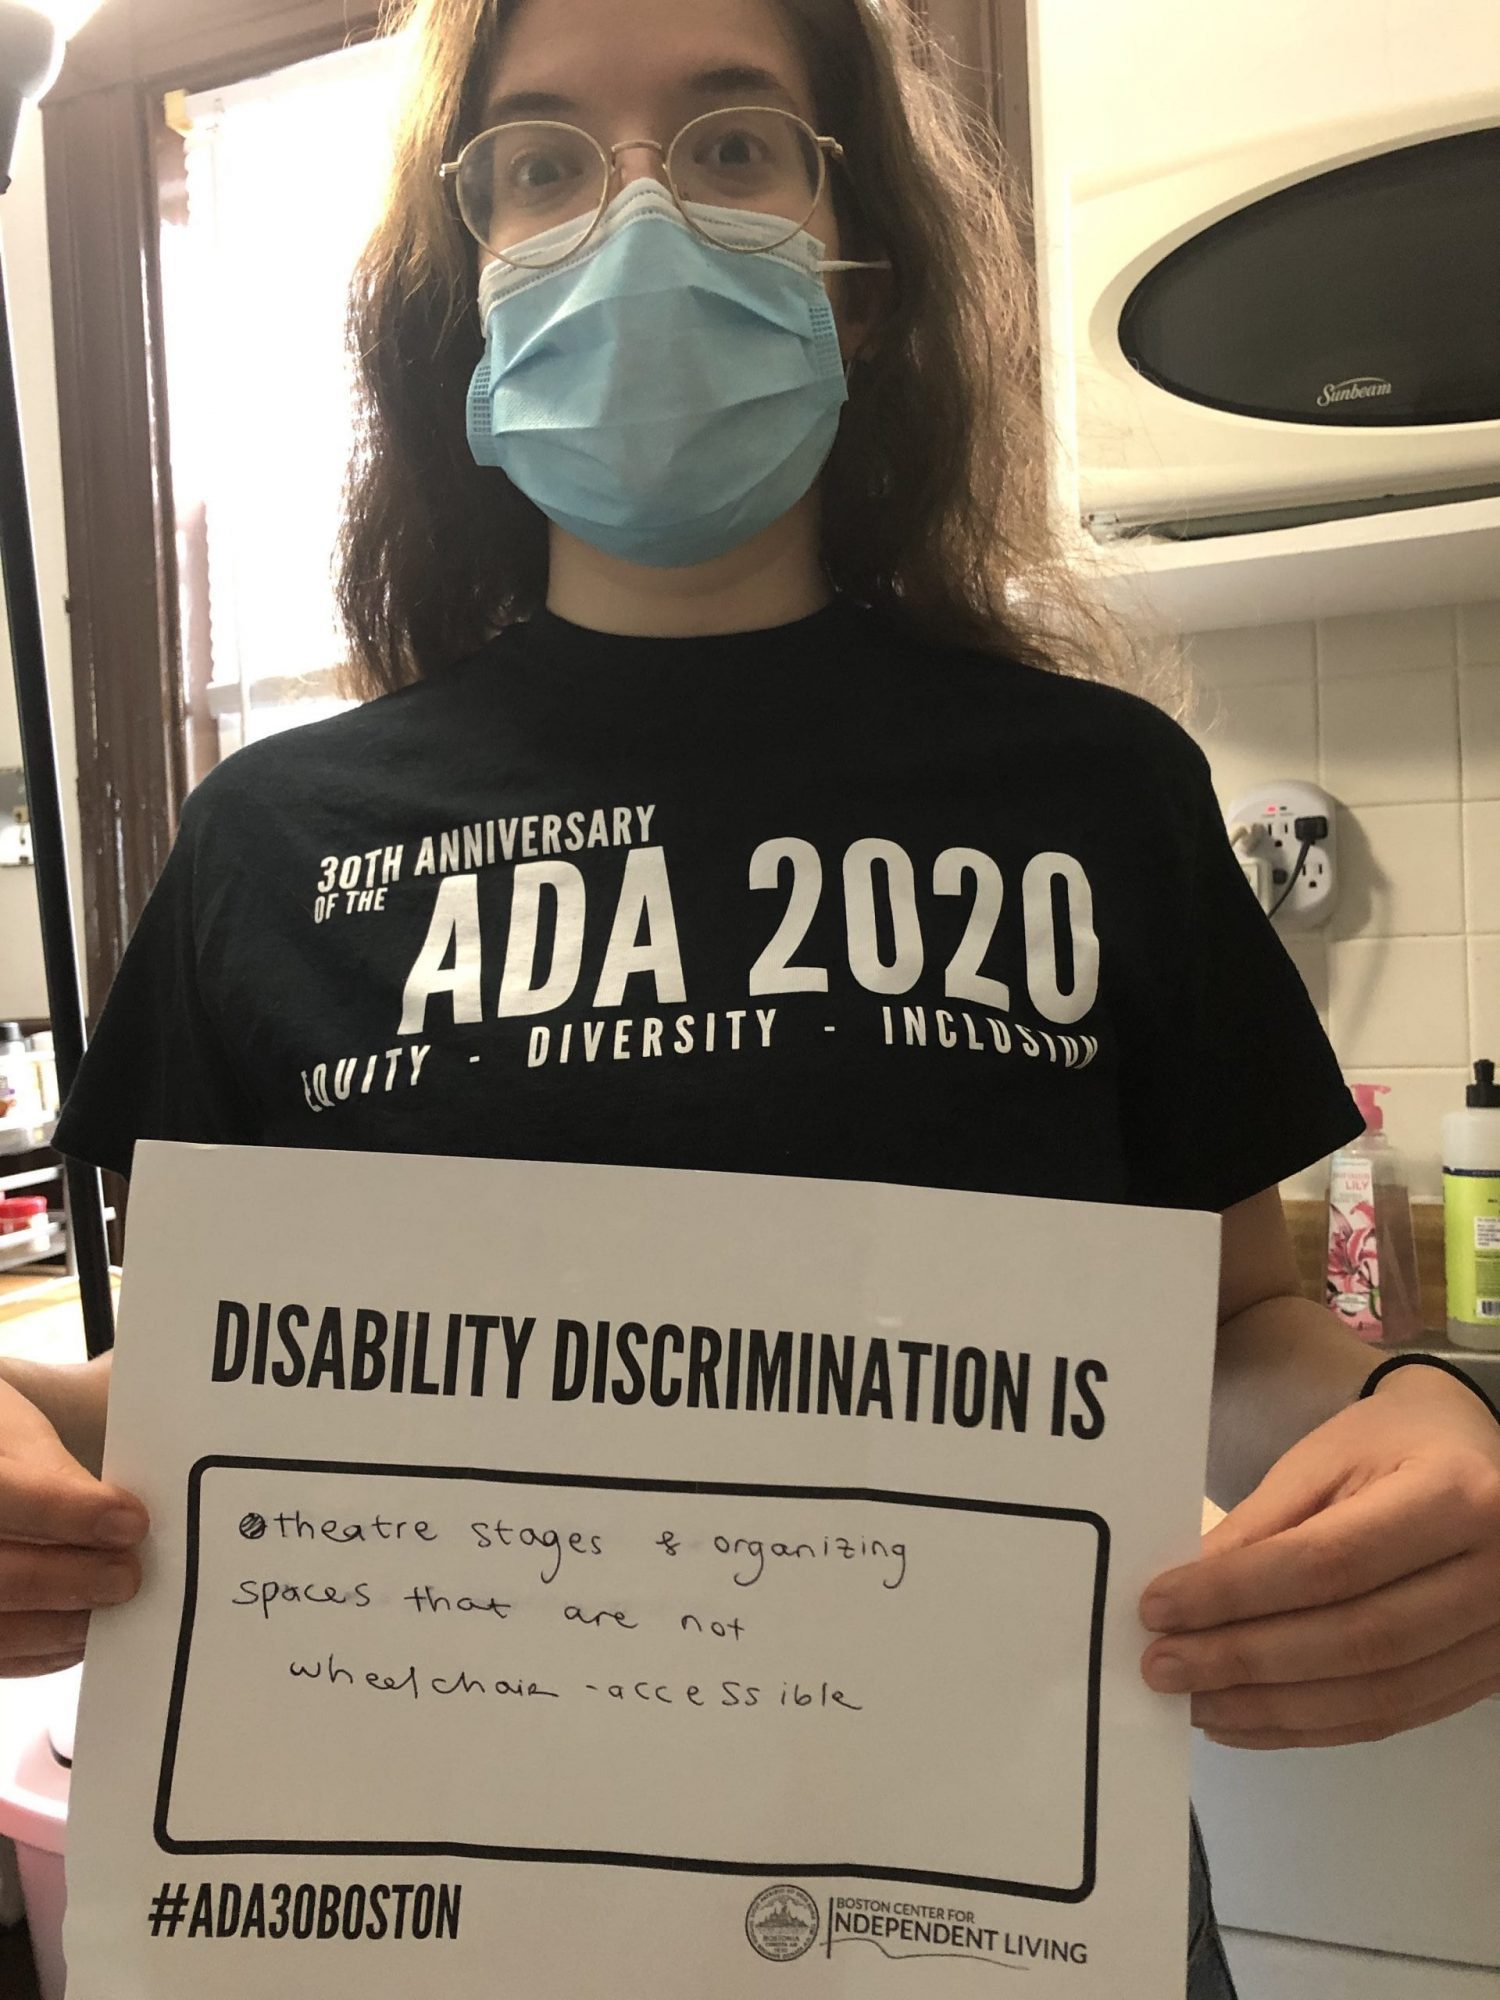 A person wearing a black ADA 30 t-shirt and blue face mask holds up a sign saying DISABILITY DISCRIMINATION THEATRE STAGES & ORGANIZING SPACES THAT ARE NOT WHEELCHAIR ACCESSIBLE.